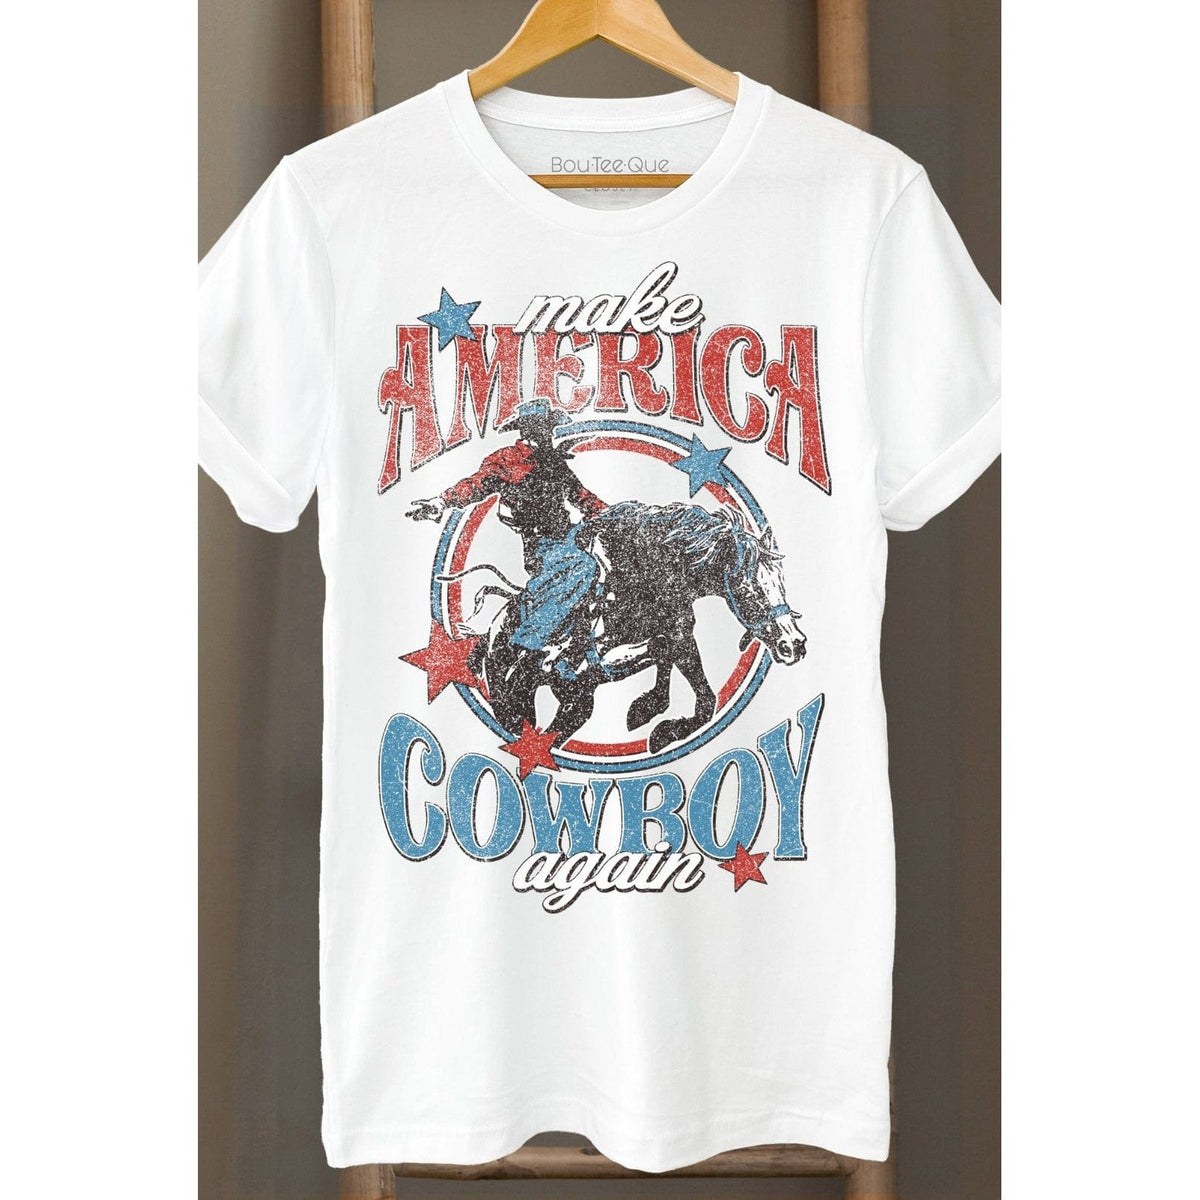 Make America Cowboy Again Tee | Country Graphic Tee| Conservative Tee Graphic T-shirt TheFringeCultureCollective